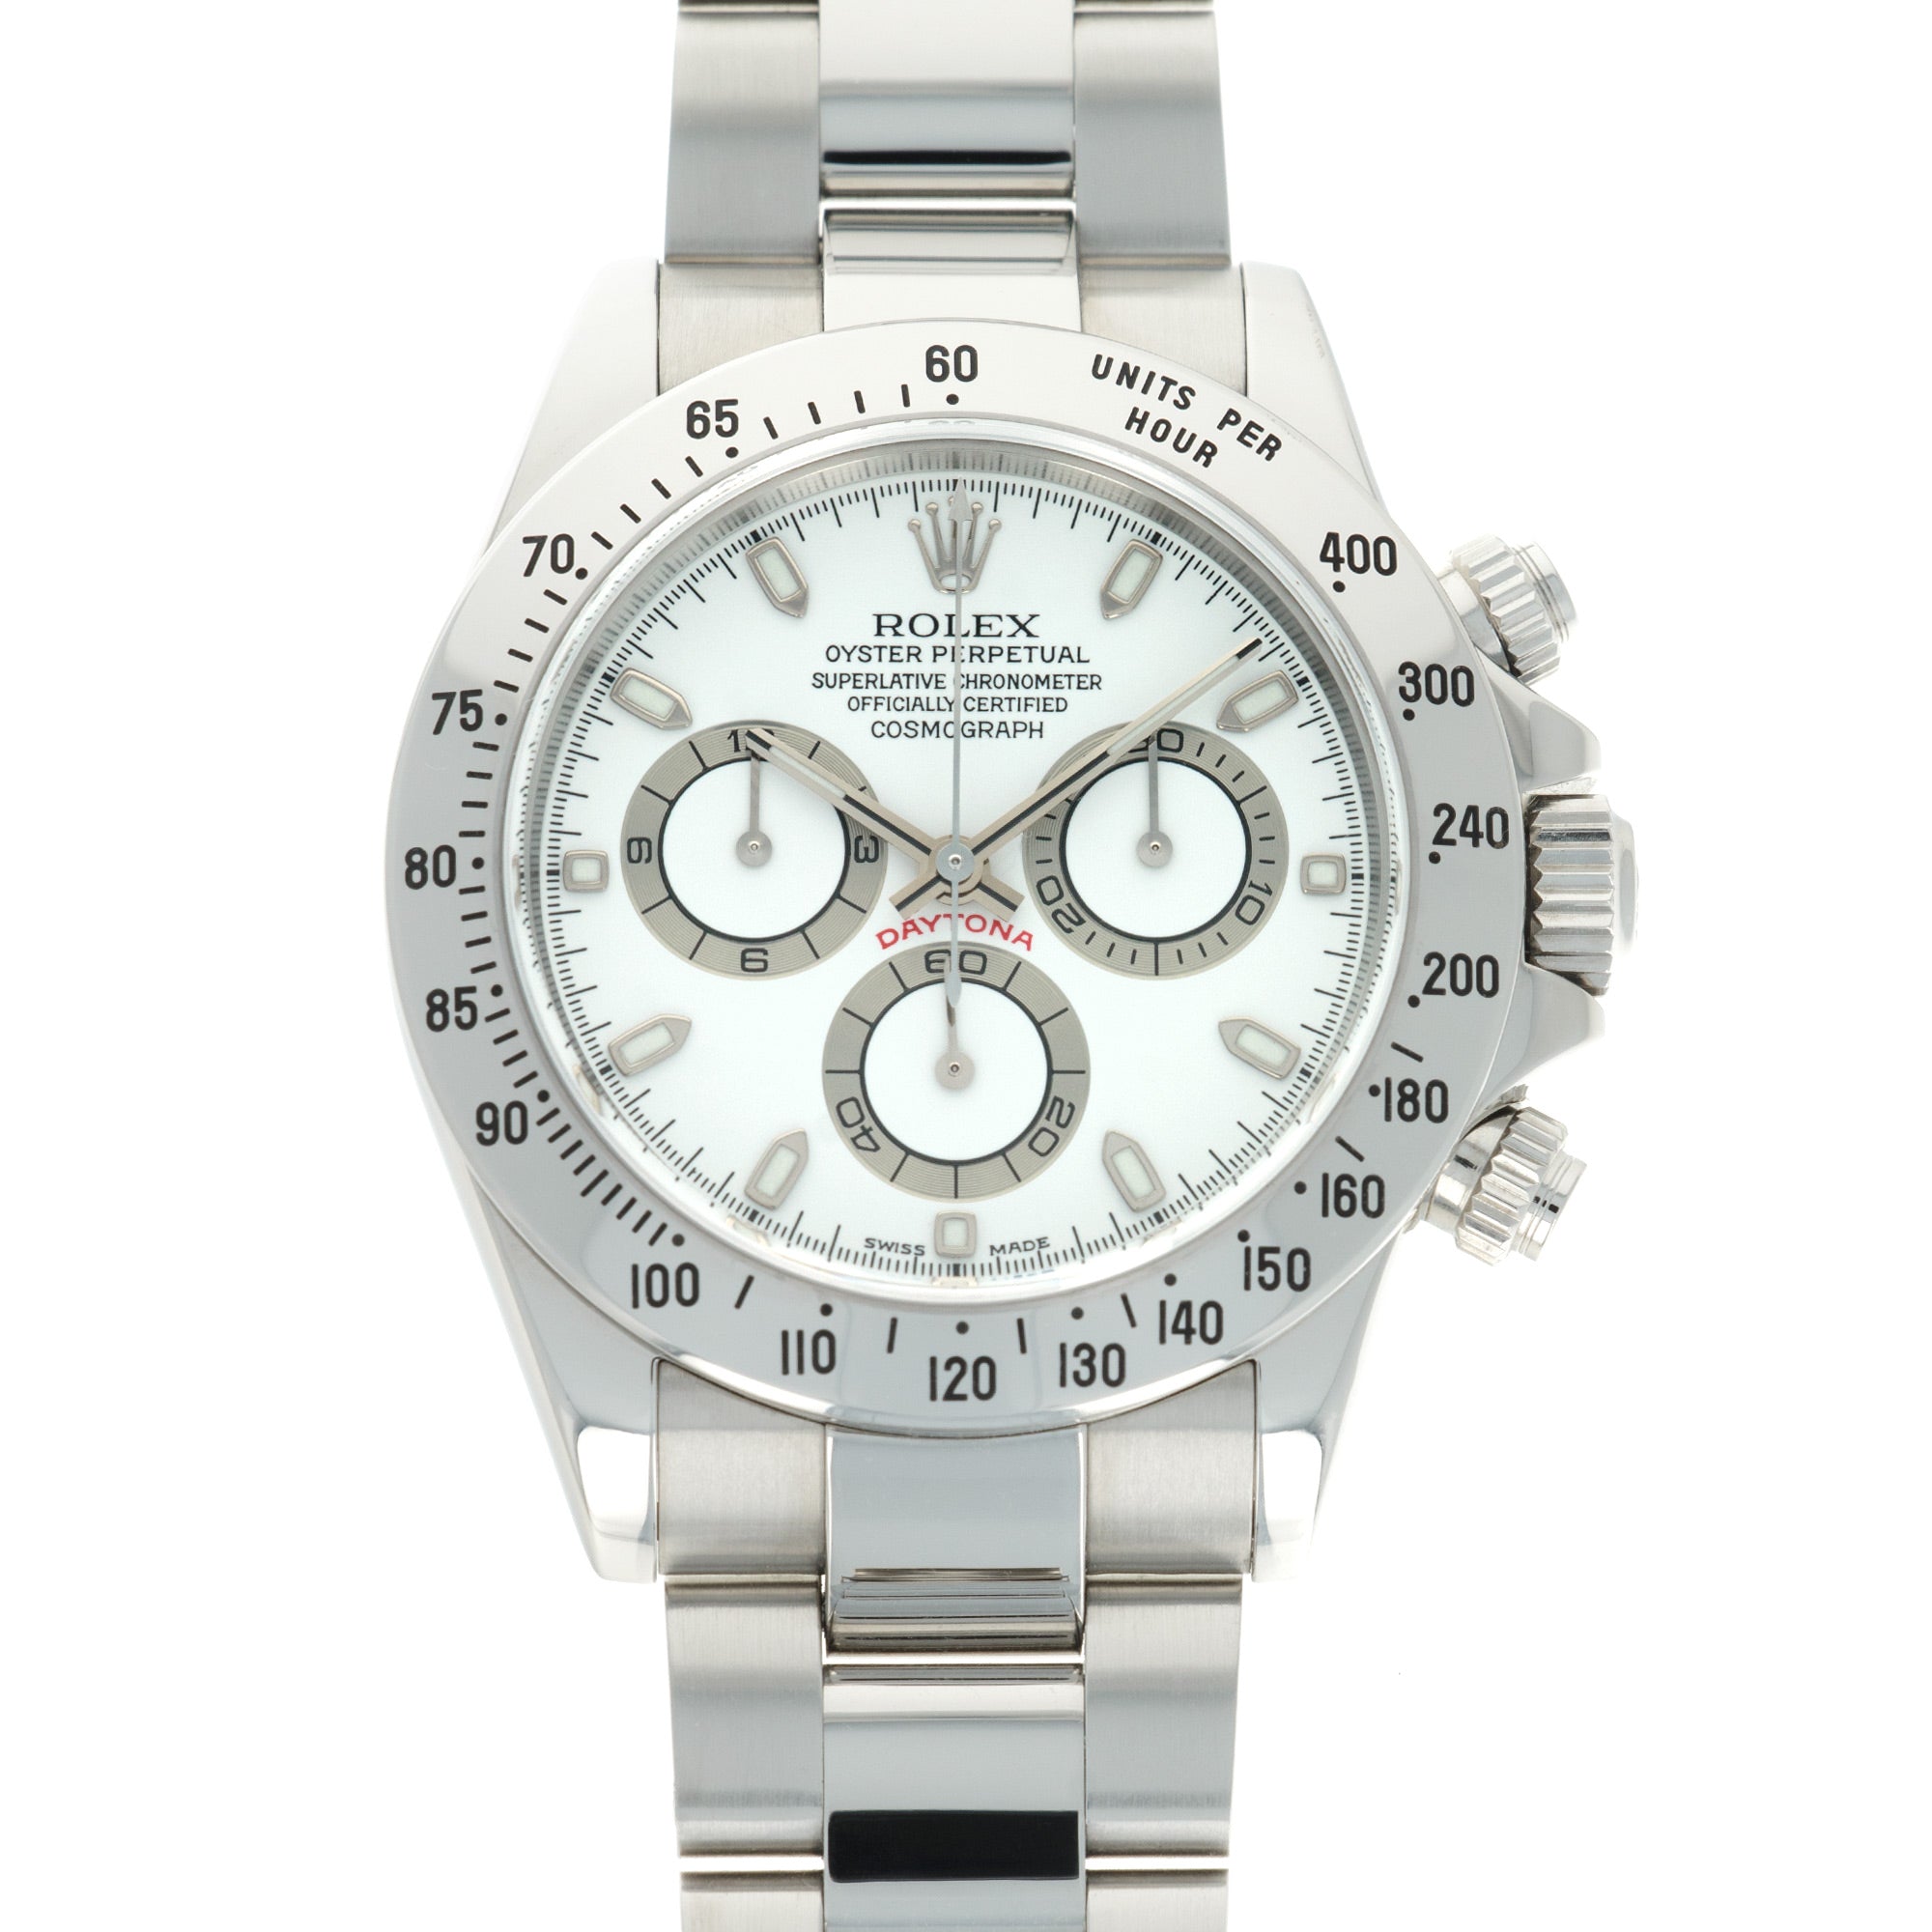 Rolex - Rolex Cosmograph Daytona Watch Ref. 116520, with Original Box and Papers - The Keystone Watches